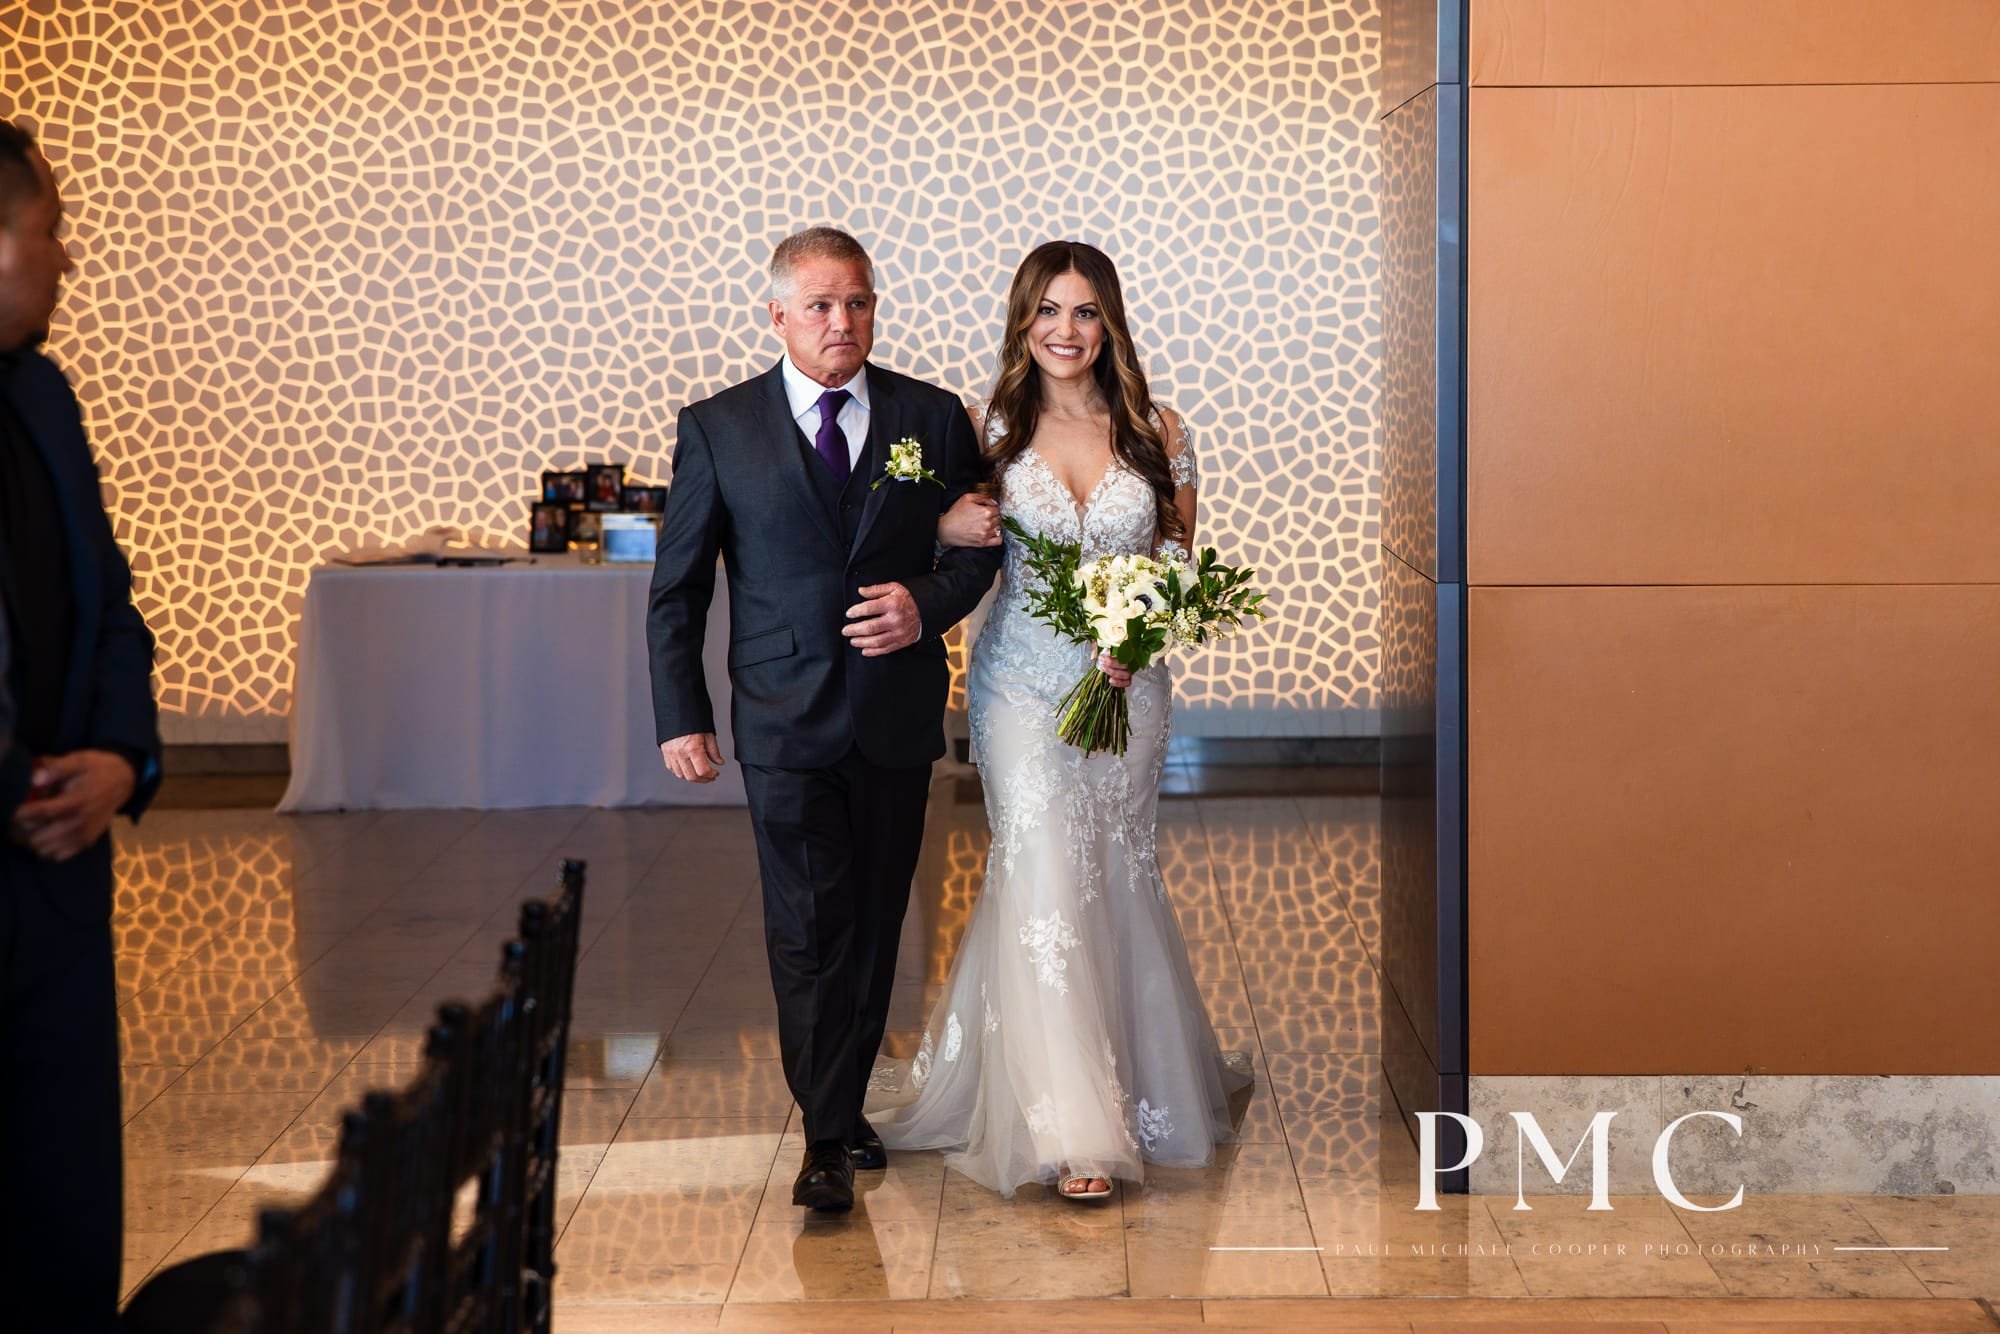 A bride smiles as she is escorted by her father down the aisle during her wedding ceremony at the Ultimate Skybox in Downtown San Diego.